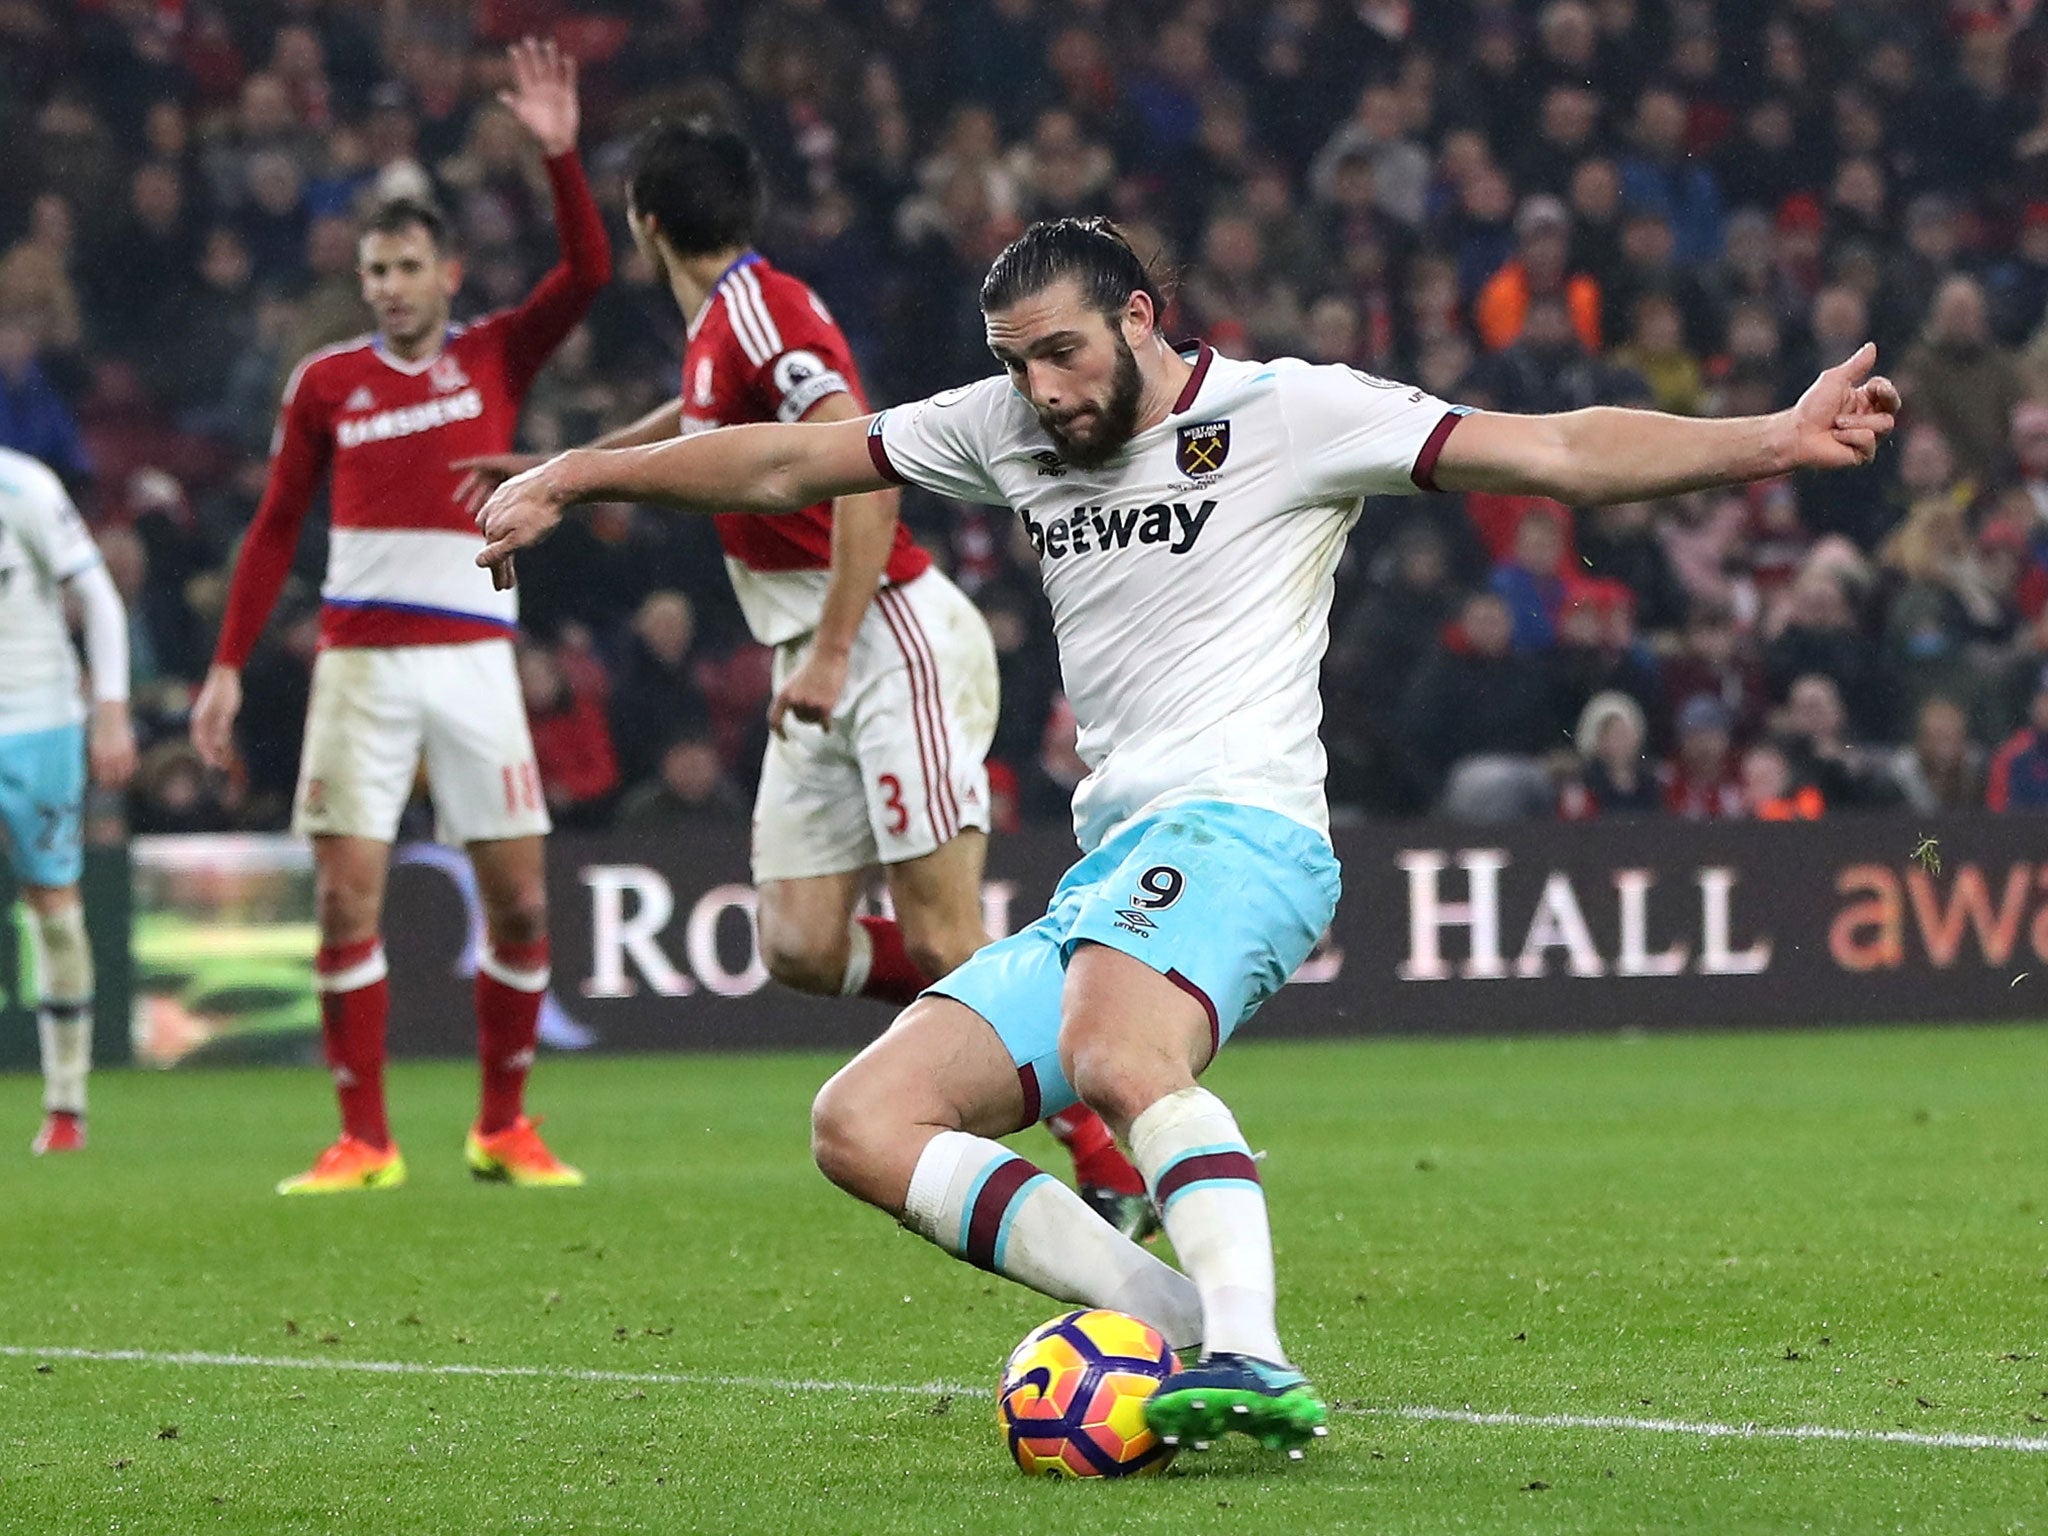 Carroll's three goals in two games have helped West Ham into the top half of the table